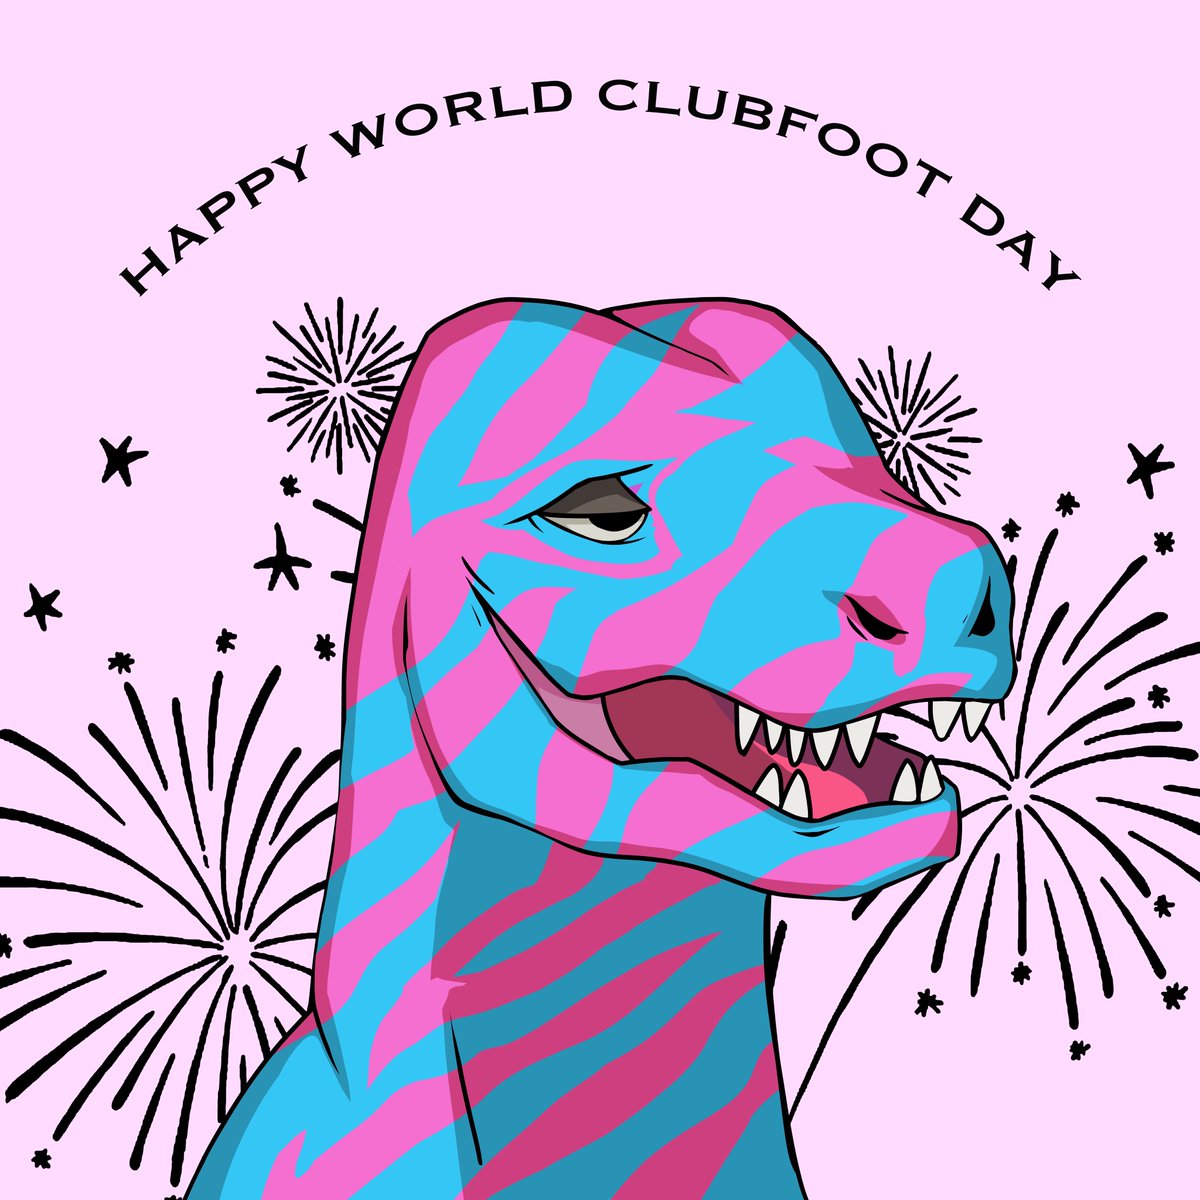 Happy World Clubfoot day. I made this as an honorary for my daughter to celebrate her day today and spread awareness for others. She was born with bilateral clubfoot but after many castings and micro surgery we were able to conquer it together! 💙 💖 
#WorldClubfootDay